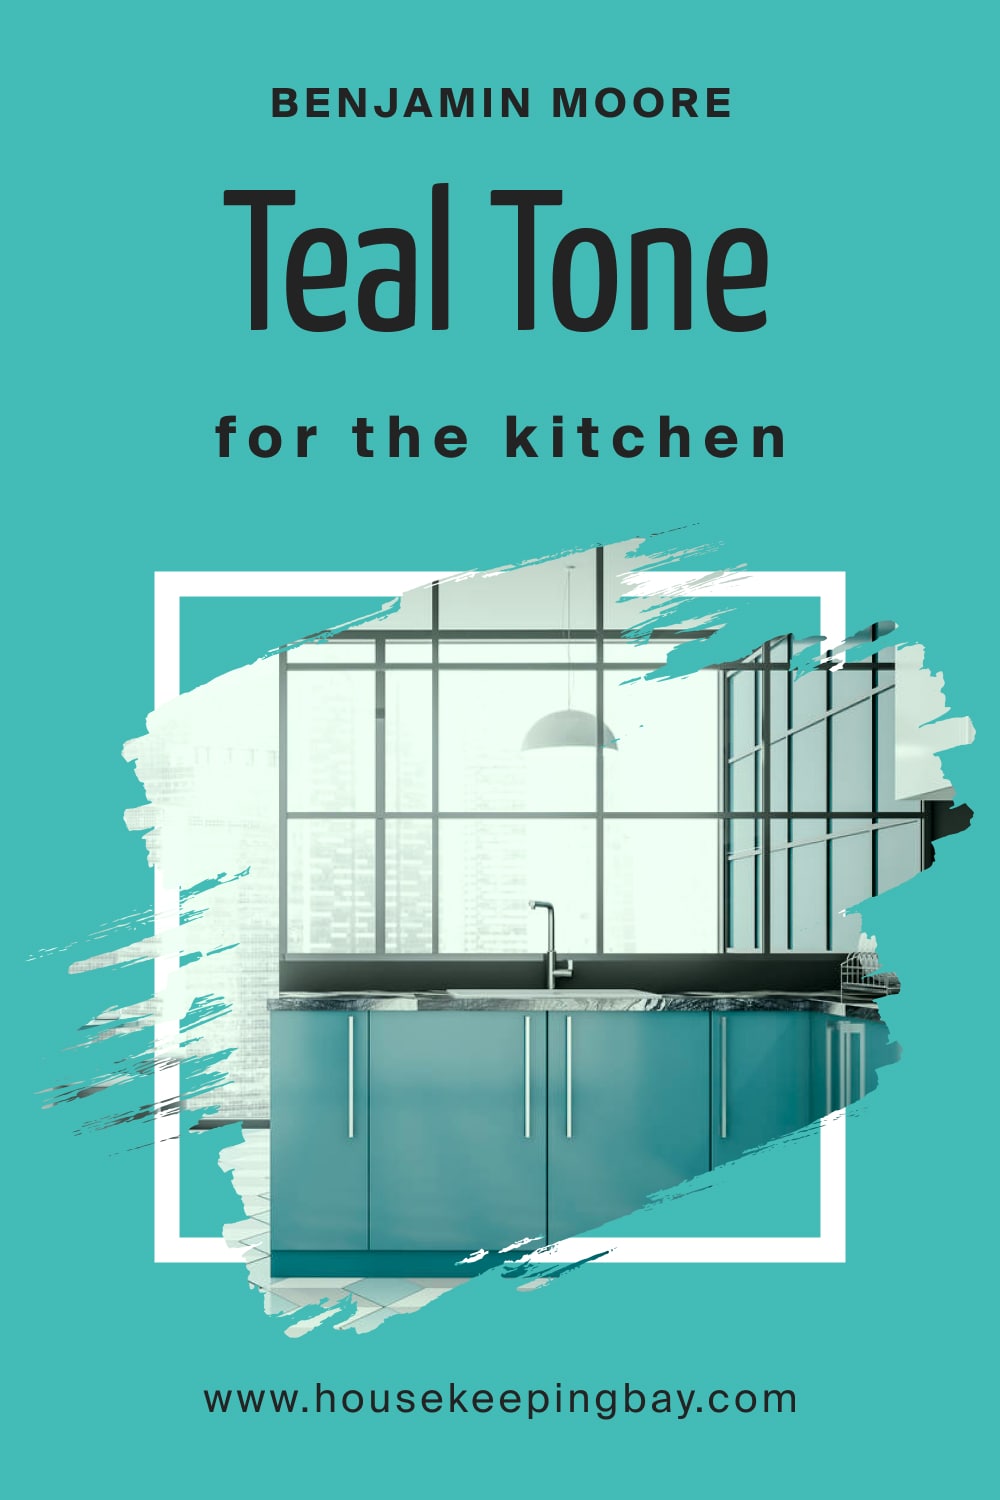 Benjamin Moore. BM Teal Tone 663 for the Kitchen